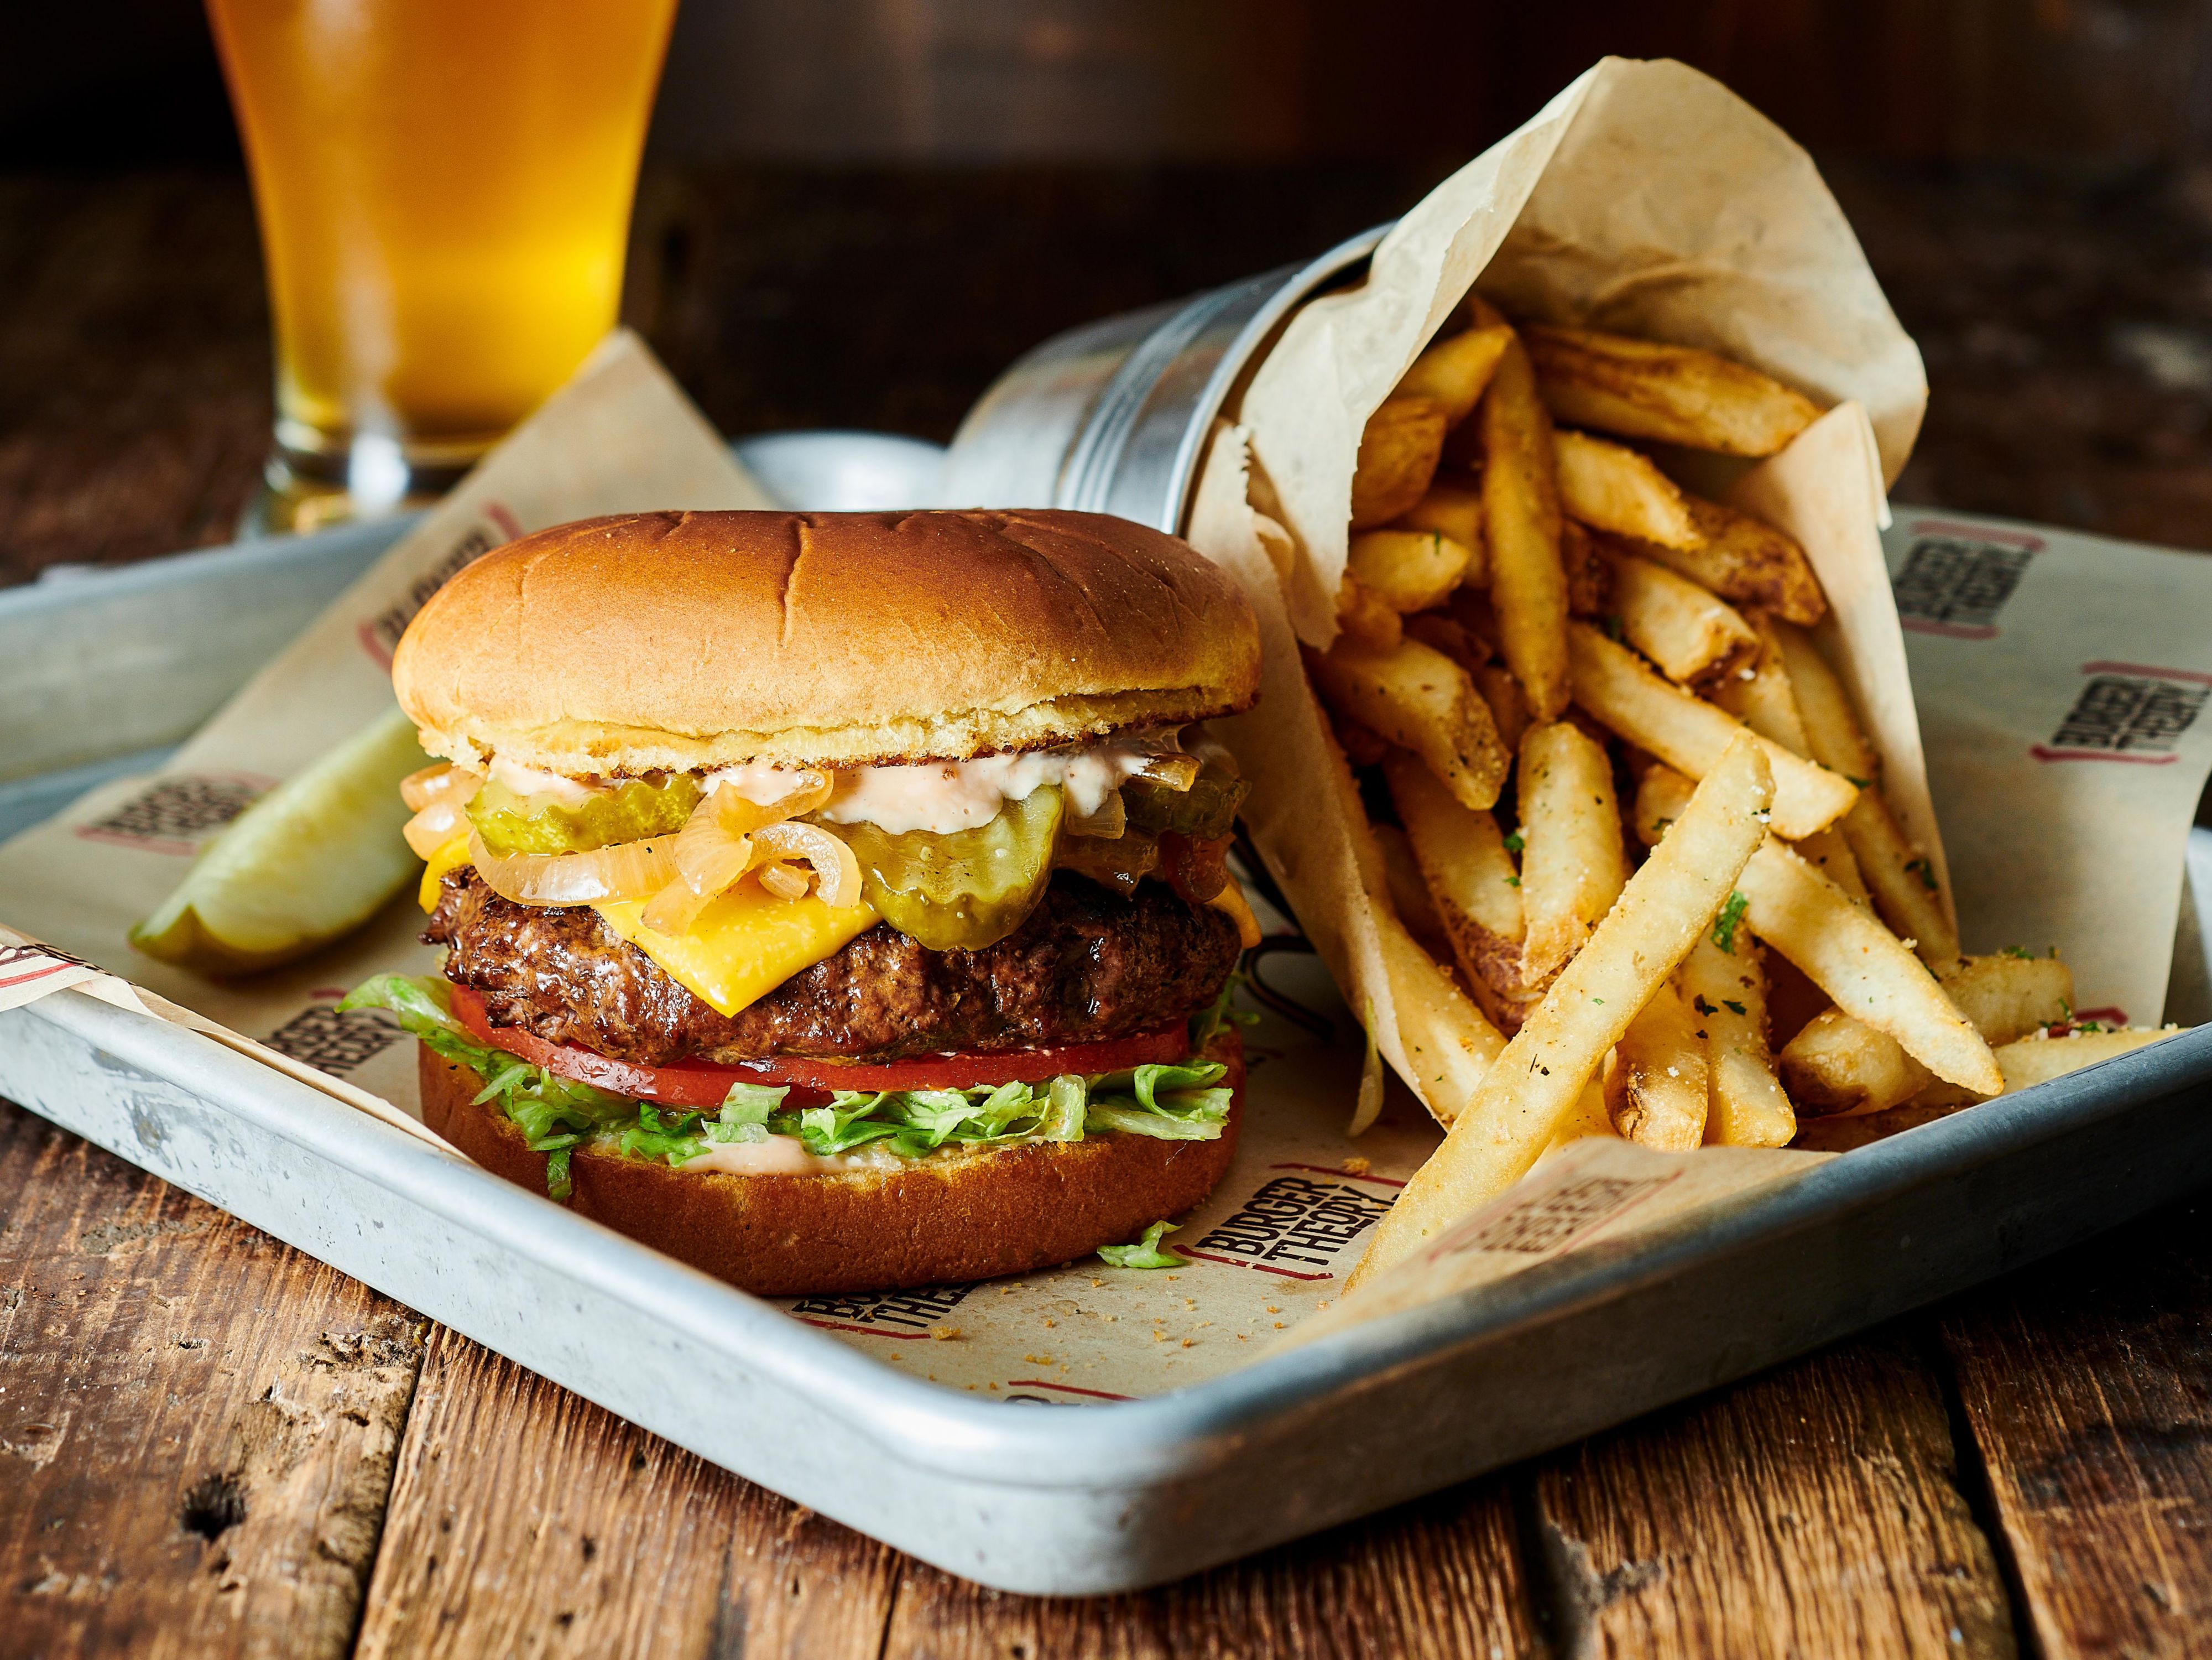 Burger Theory is our on site restaurant, open for breakfast, lunch, and dinner and room service. We specialize in burgers and craft beer, but offer a wide menu to please any appetite.